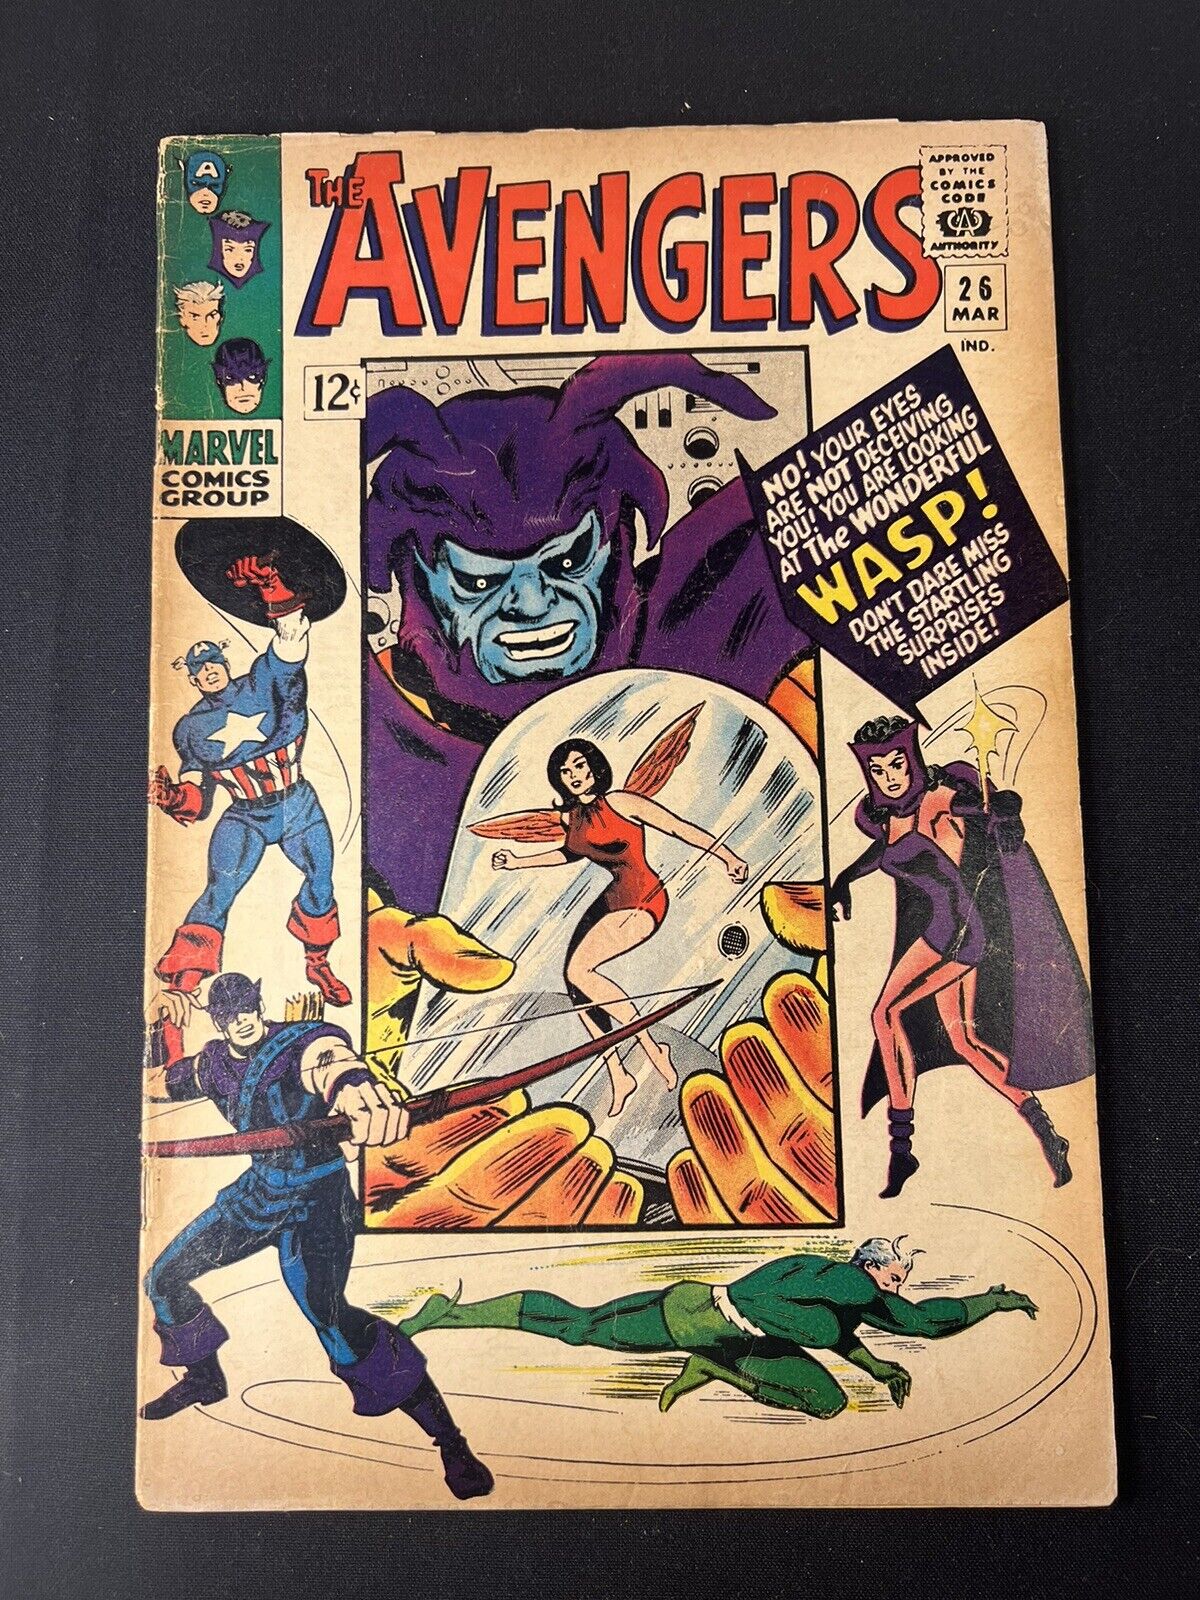 Avengers #26 Marvel 1966 Vintage Silver Age - “The Voice Of The Wasp”